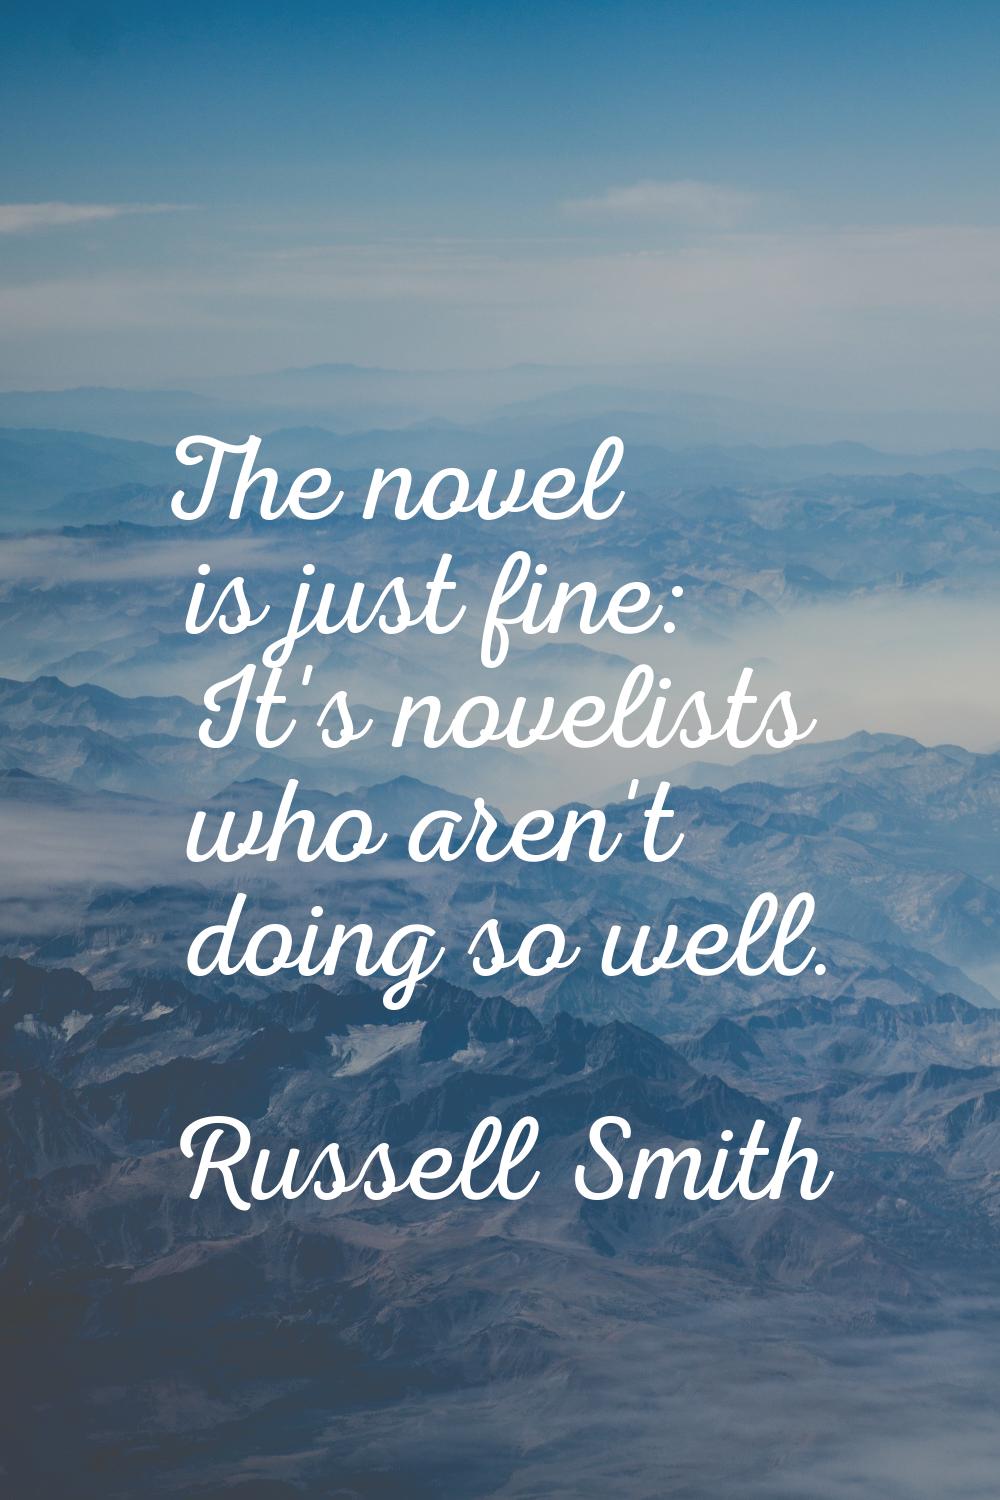 The novel is just fine: It's novelists who aren't doing so well.